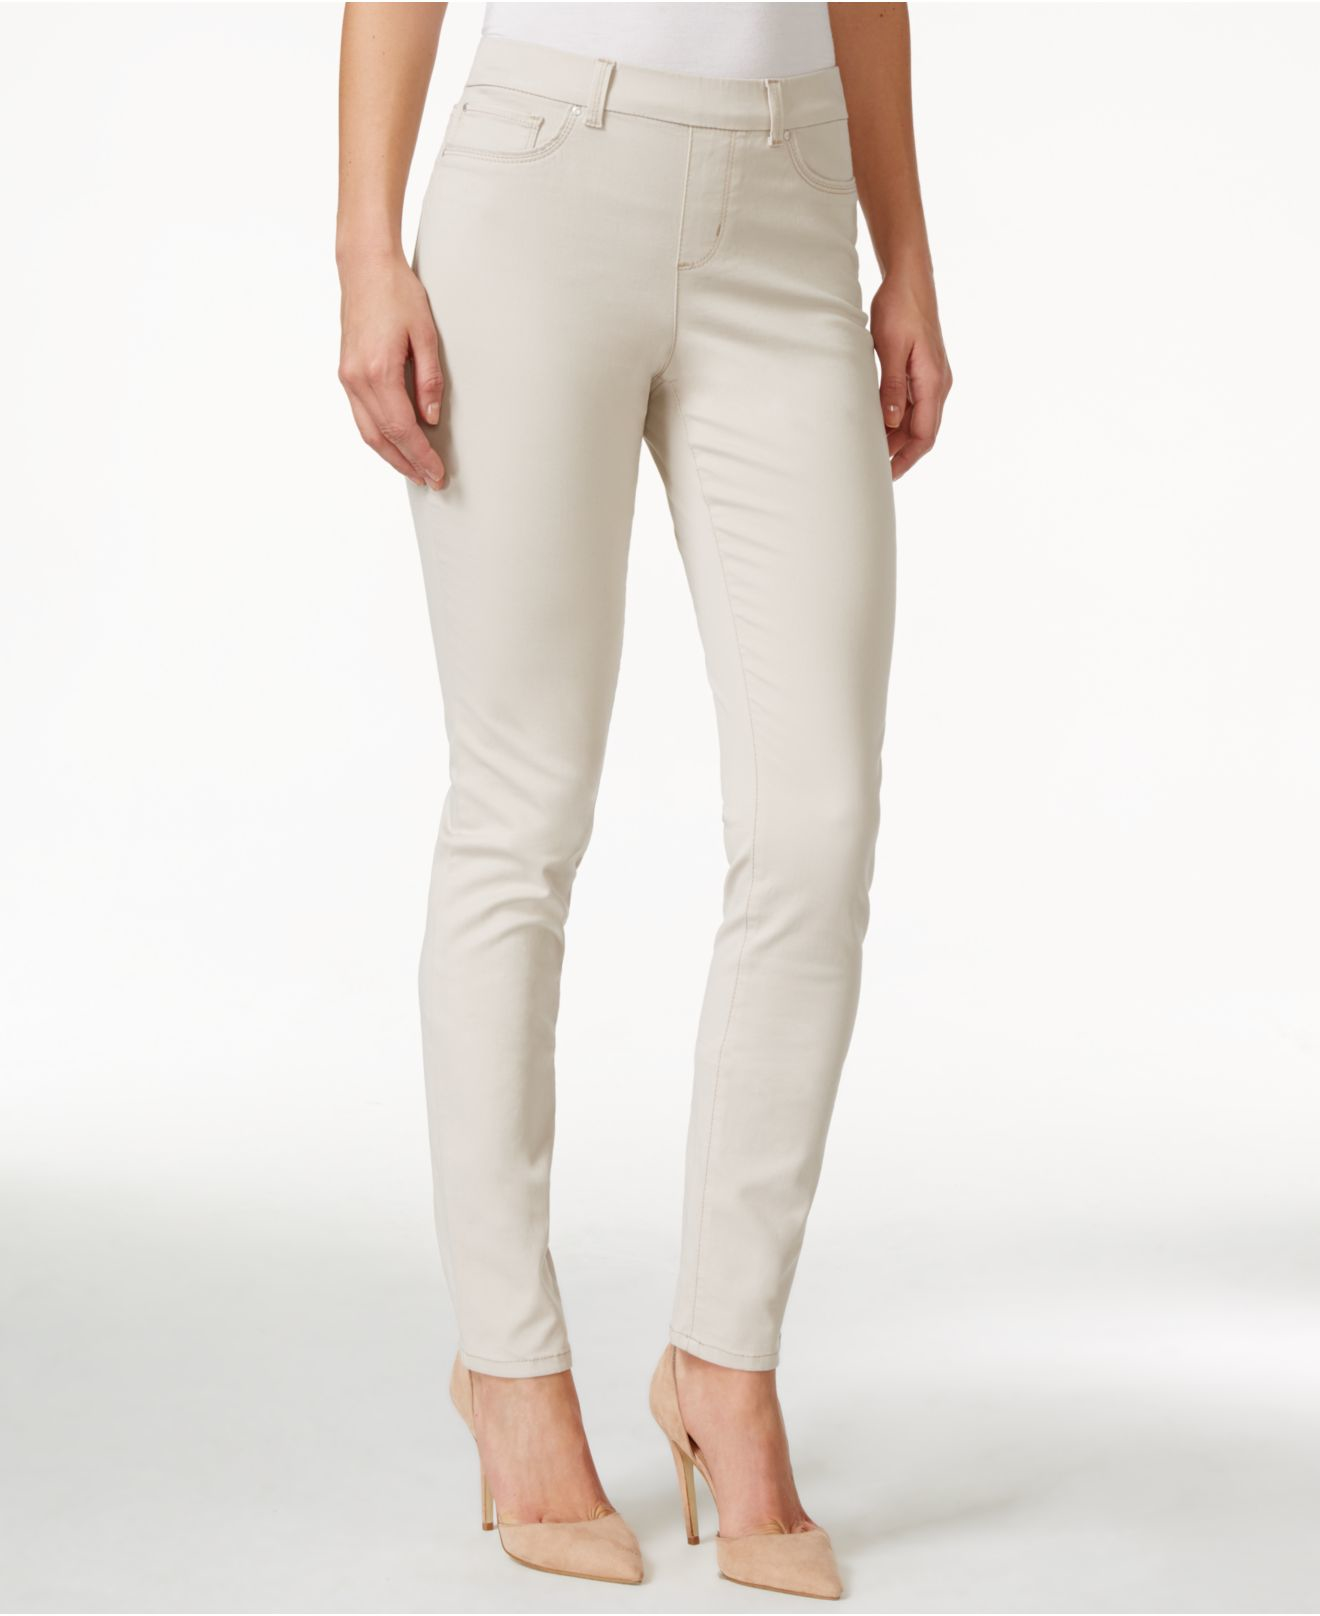 Lyst - Charter Club Colored Pull-on Skinny Jeans in White